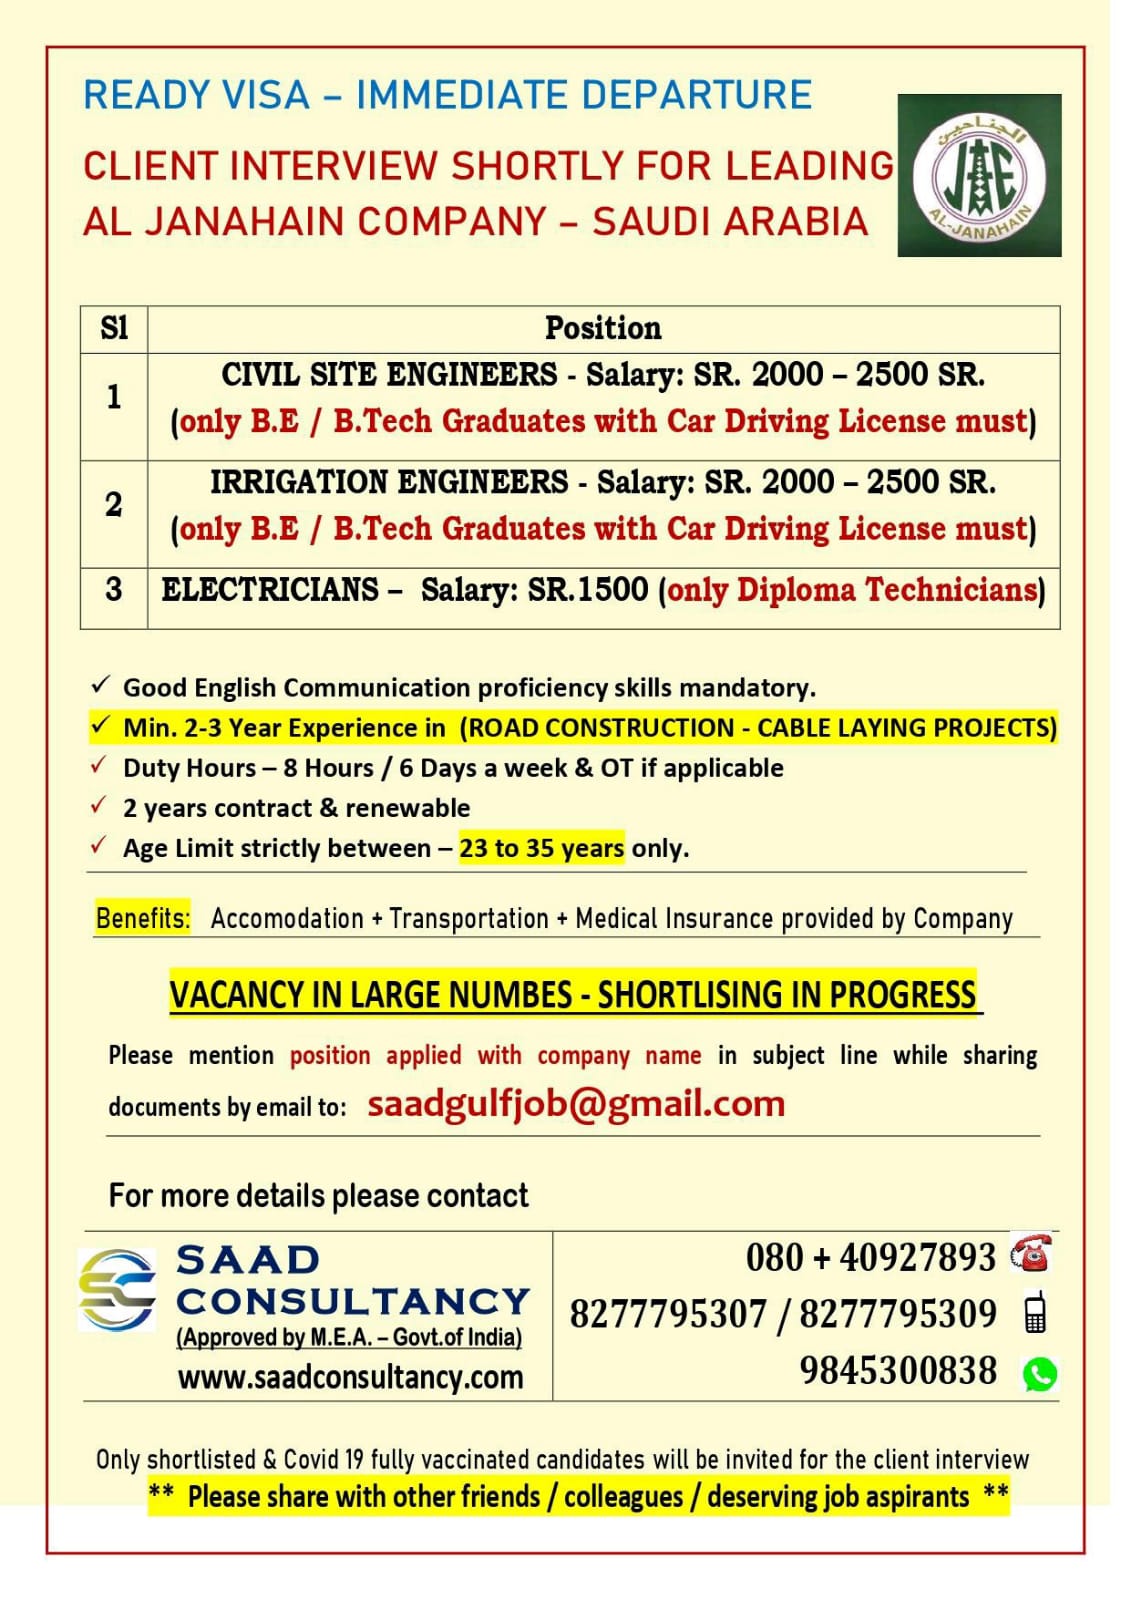 URGENTLY REQUIRED FOR LEADING COMPANY IN SAUDI ARABIA